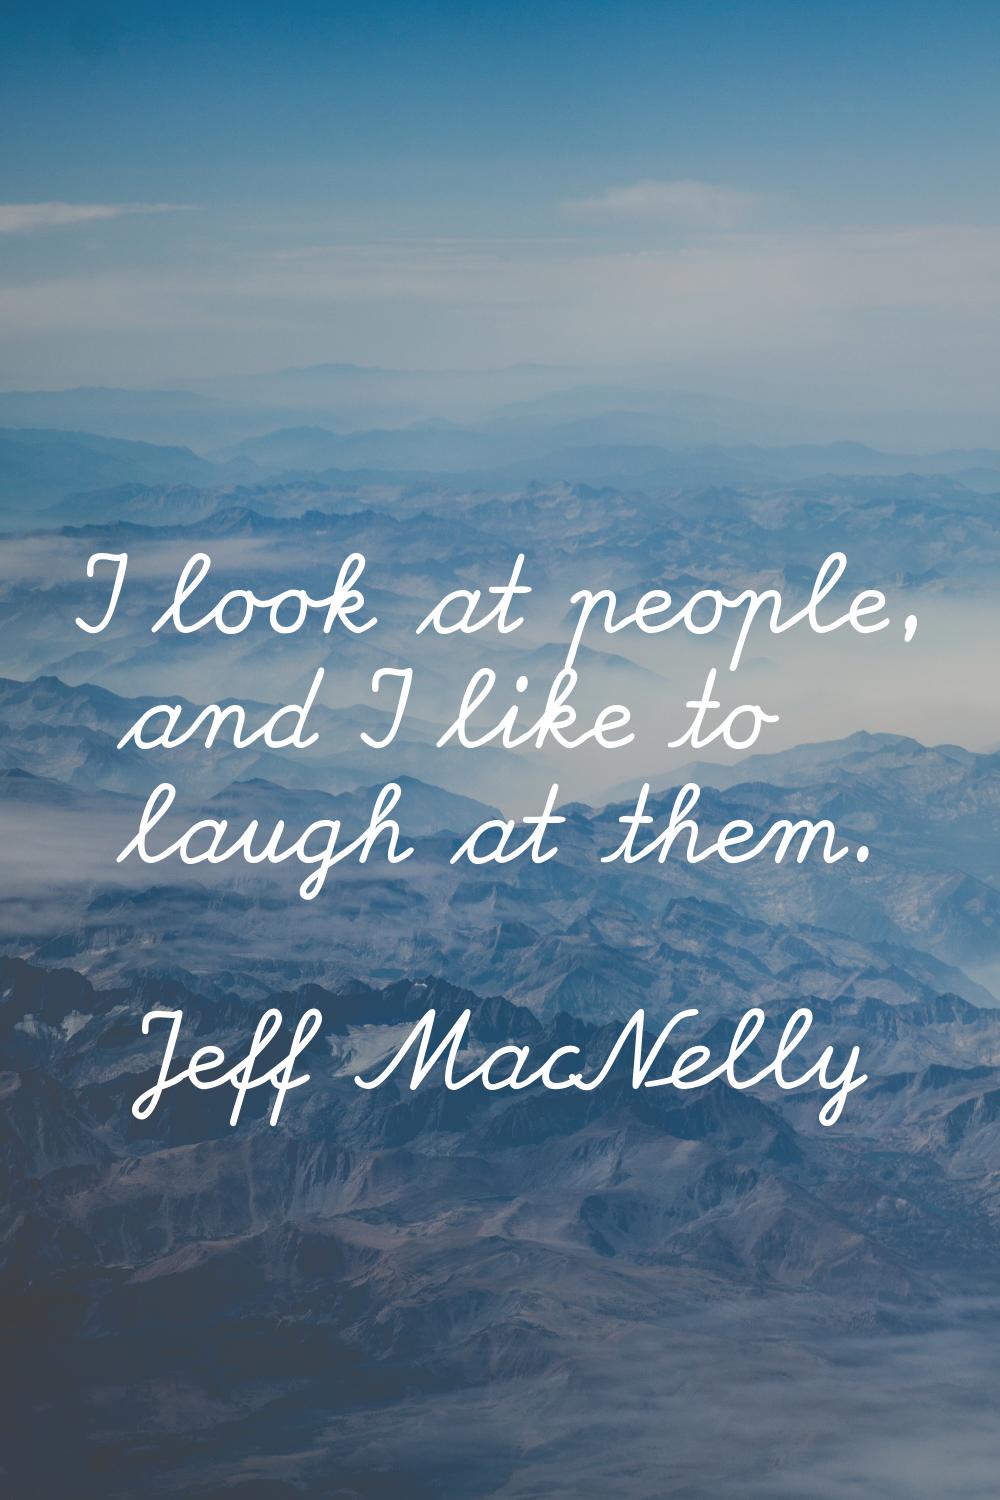 I look at people, and I like to laugh at them.